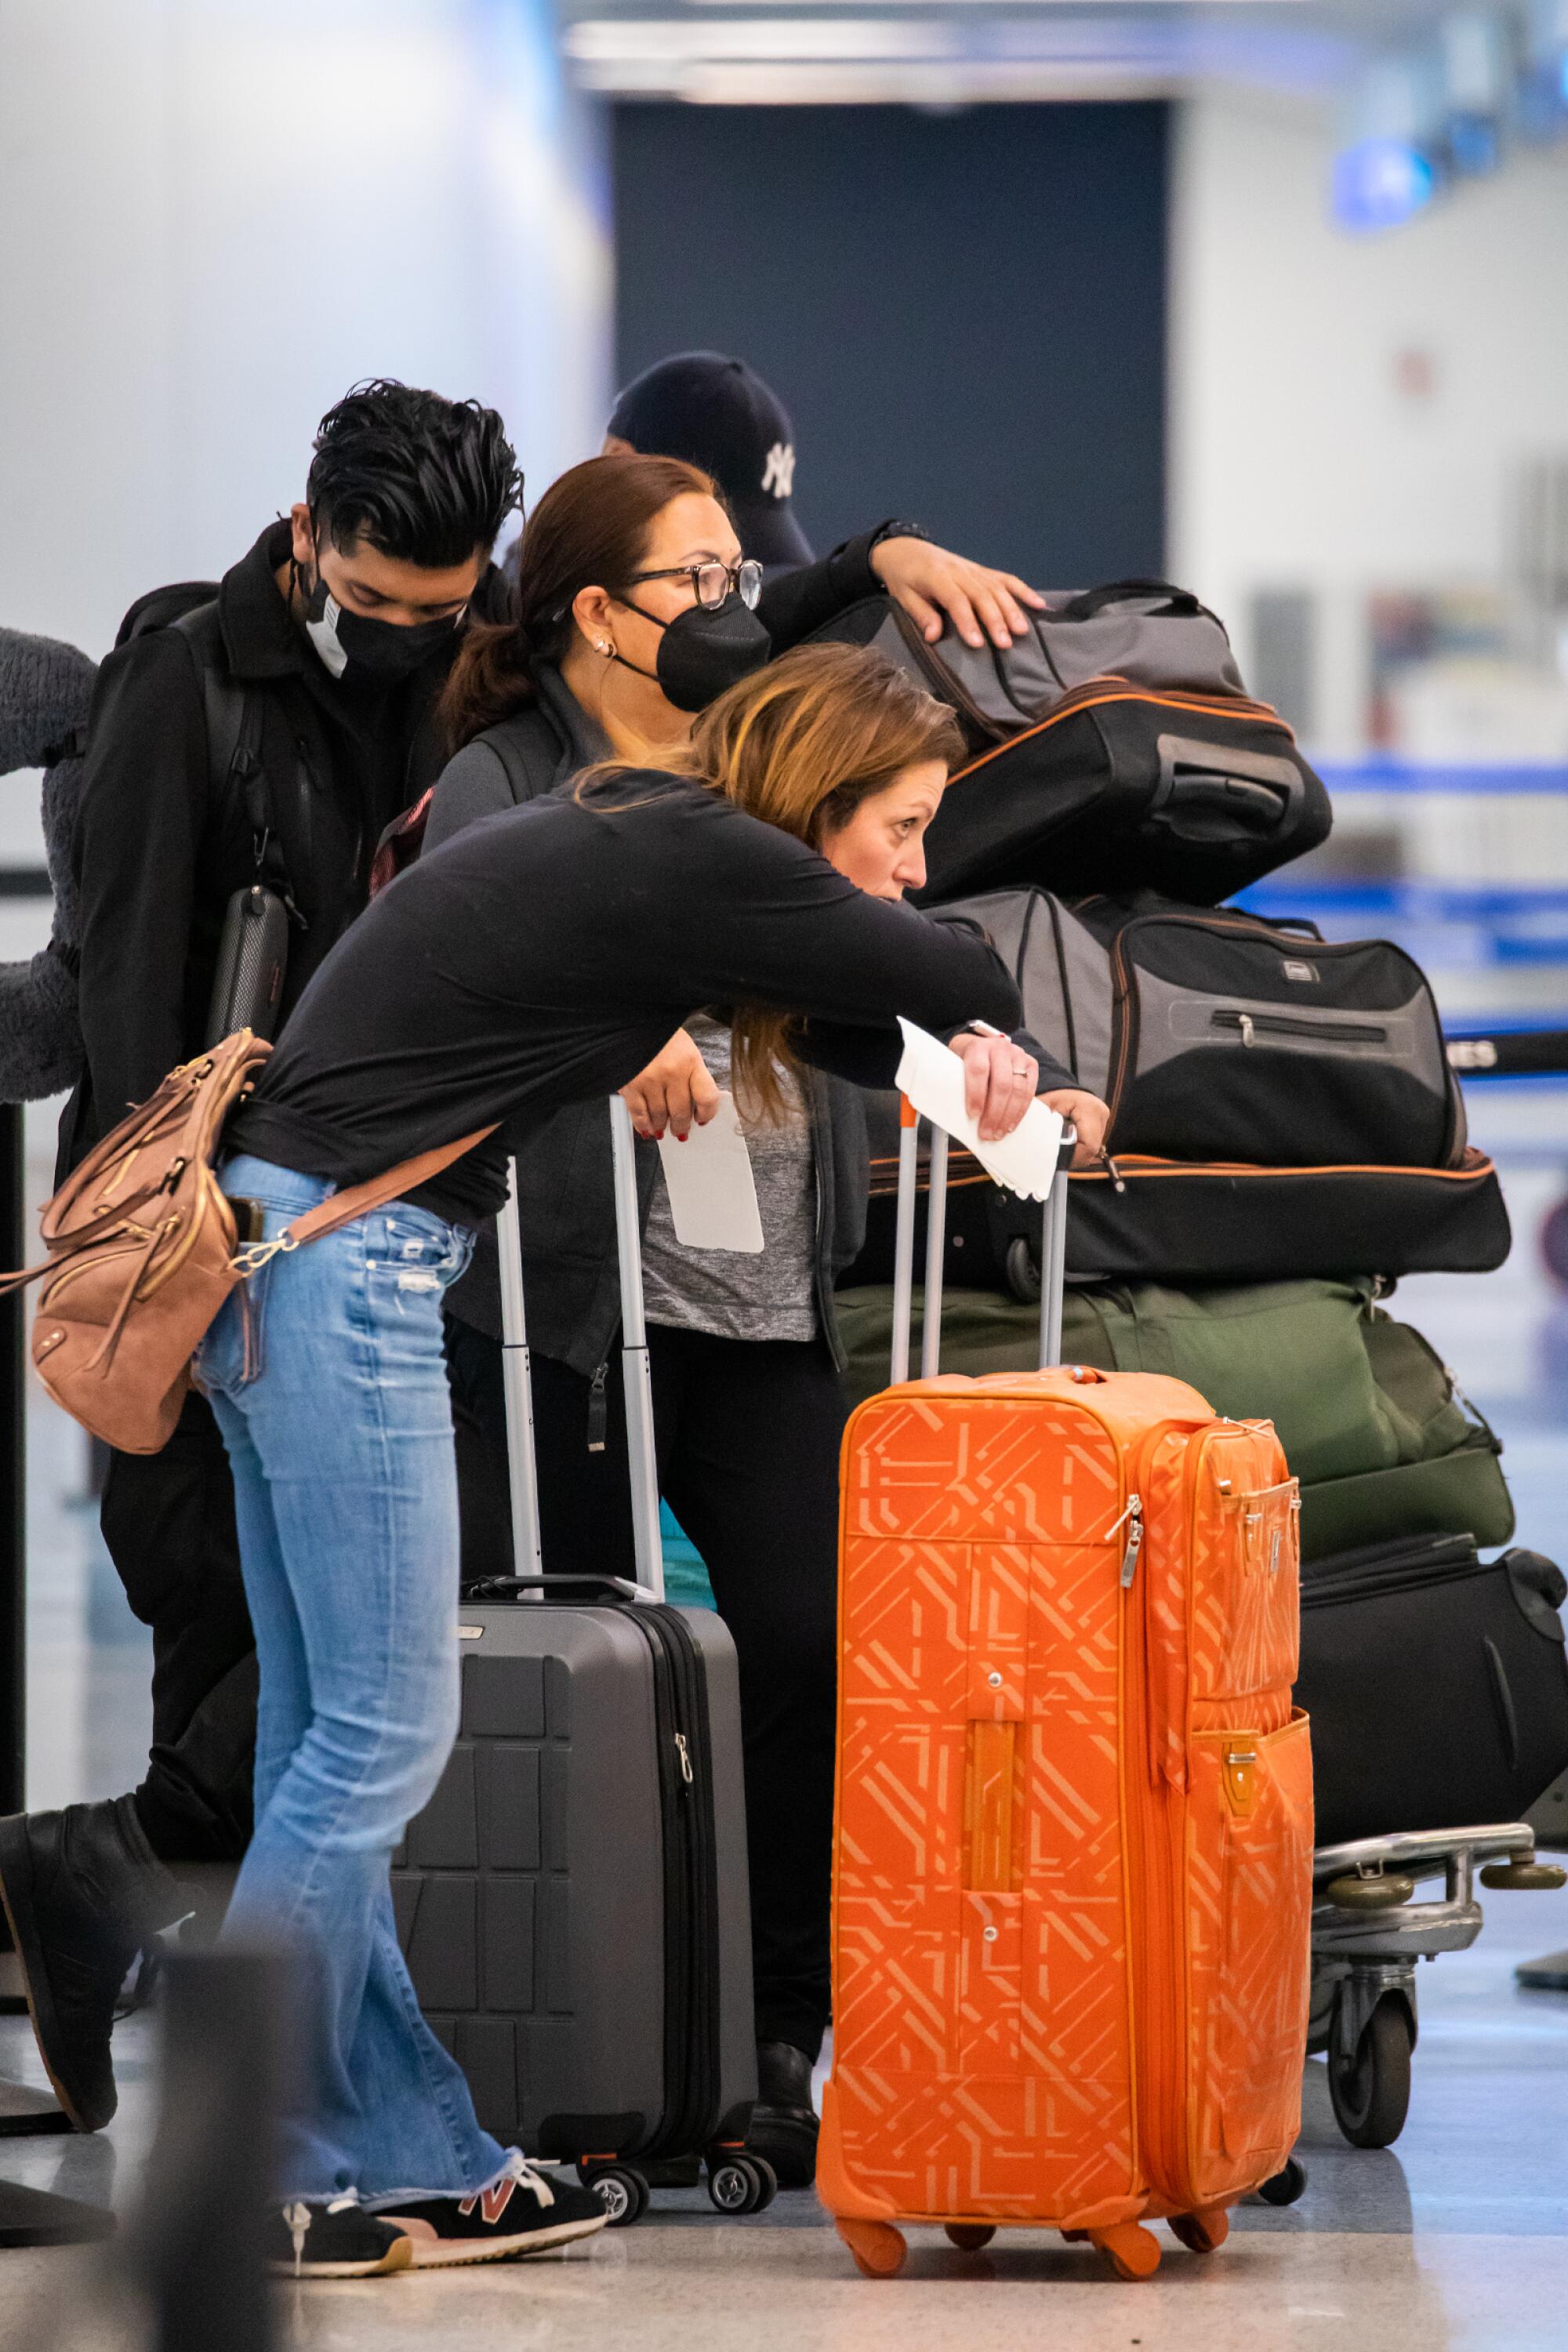 A woman waits in line with her luggage at an airport.